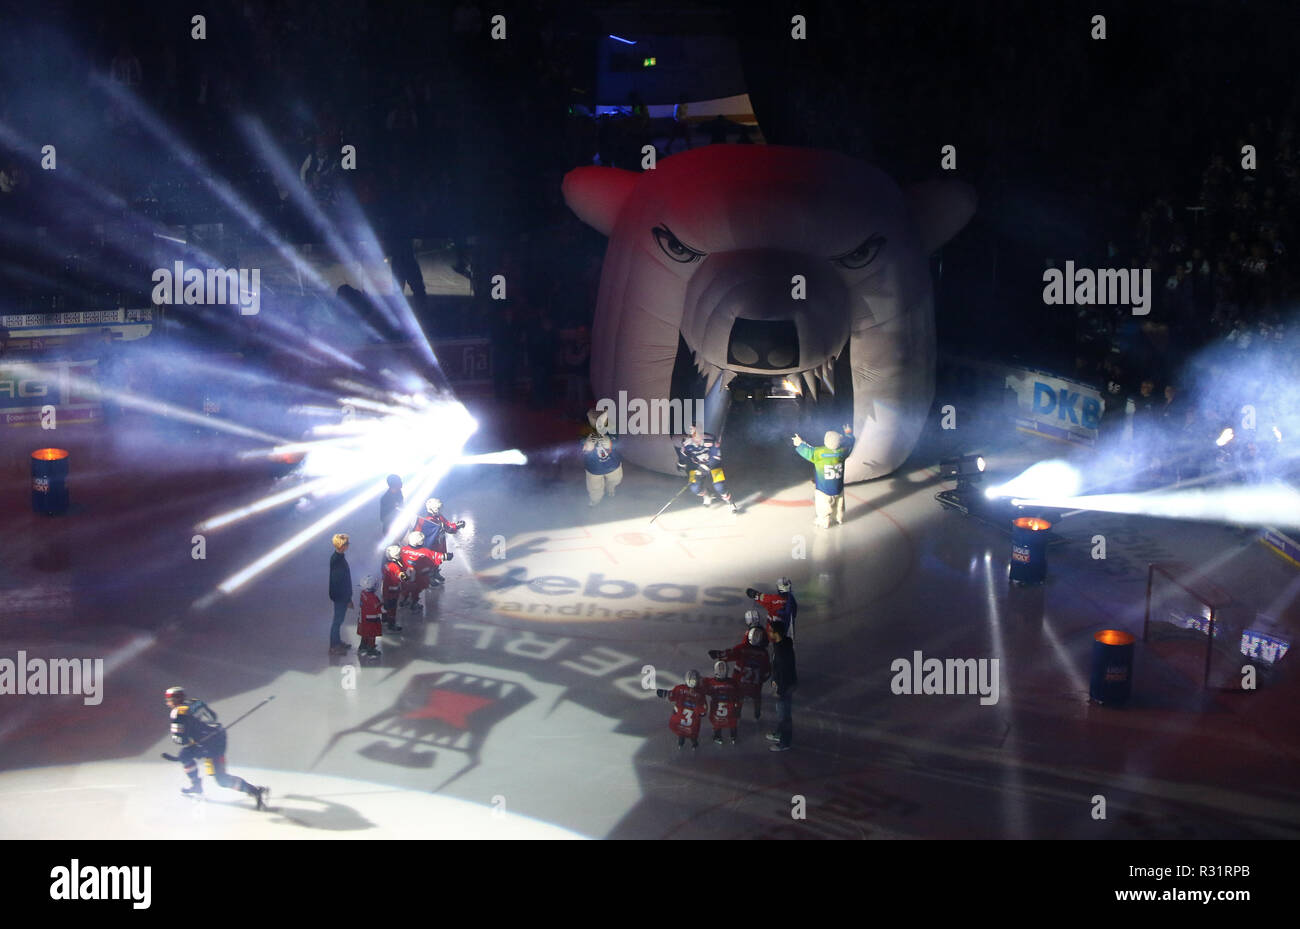 BERLIN, GERMANY - SEPTEMBER 22, 2017: Starting performance and Light Show on the ice of Mercedes-Benz Arena in Berlin before the Deutsche Eishockey Li Stock Photo